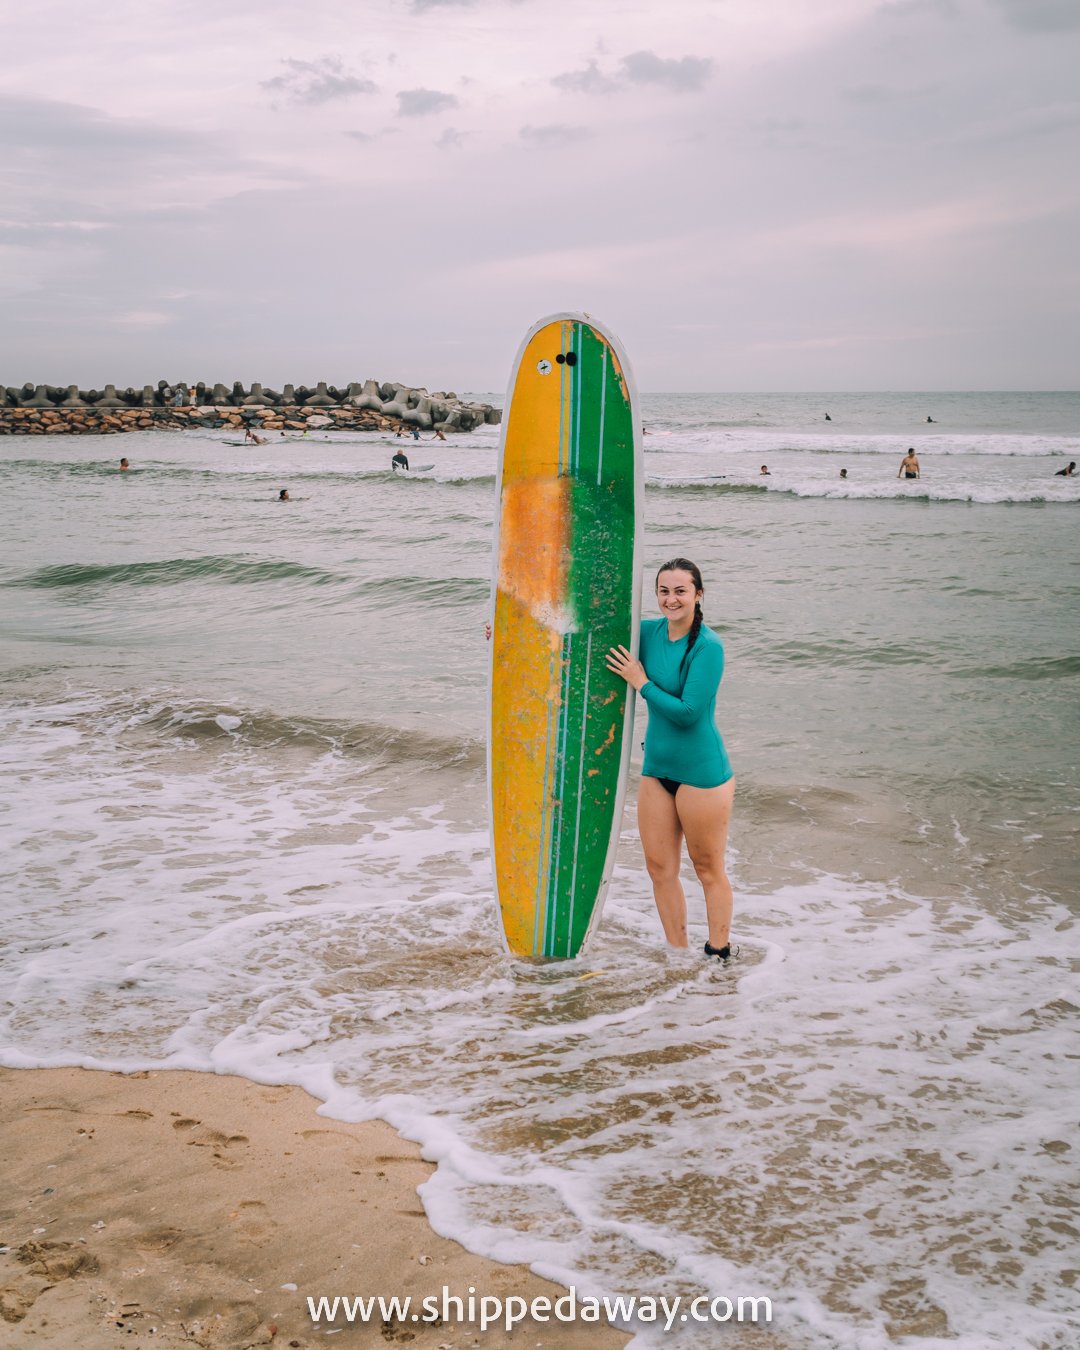 Surfing - Top thing to do in Nha Trang, Vietnam